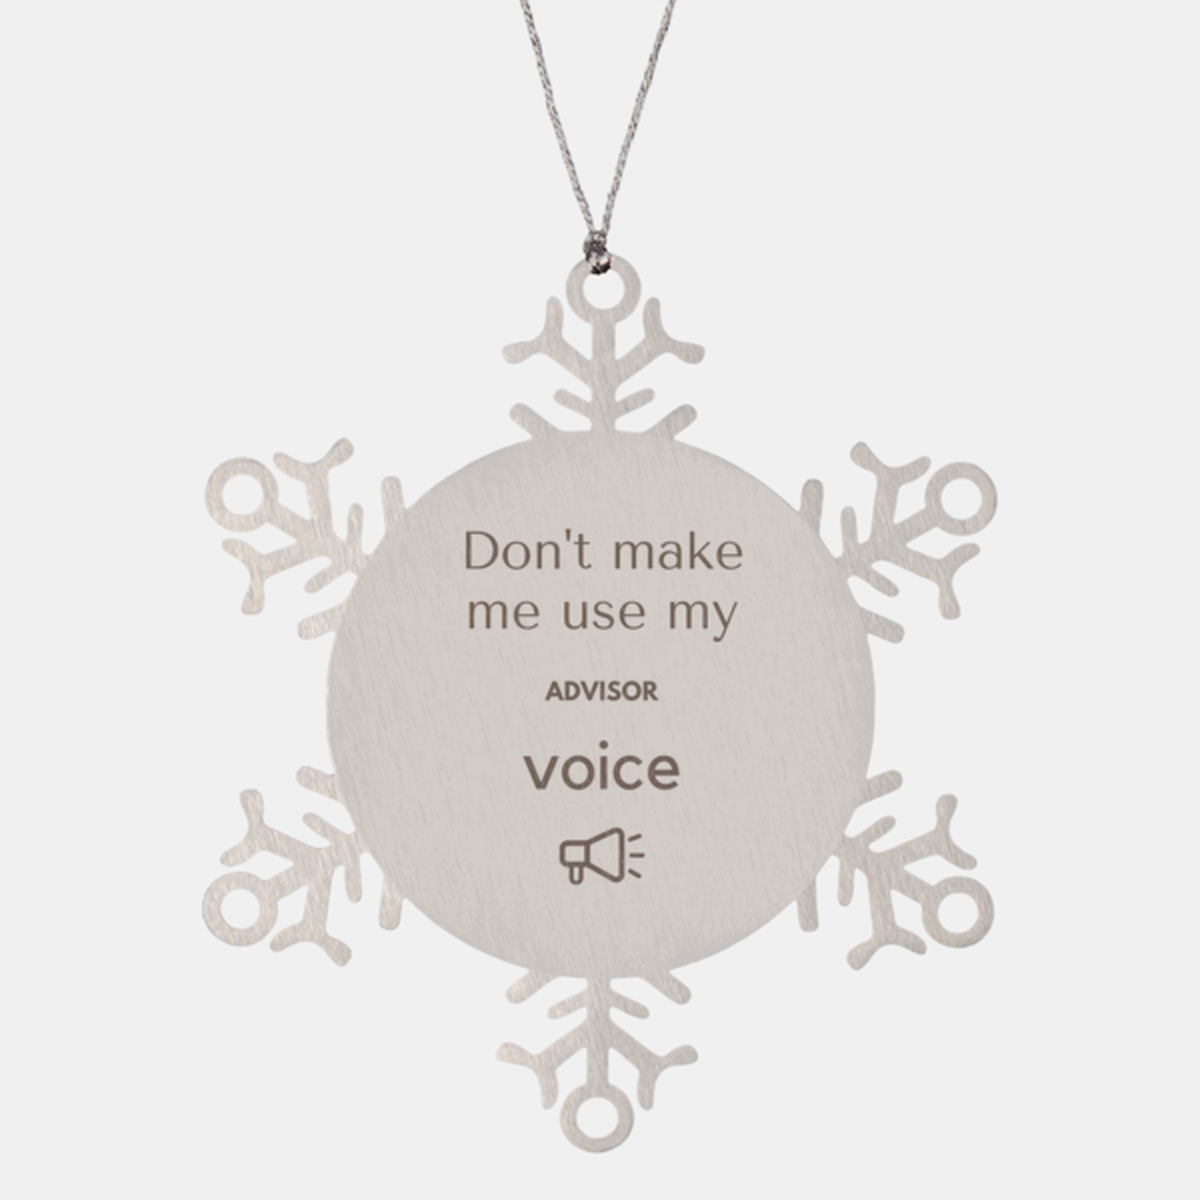 Don't make me use my Advisor voice, Sarcasm Advisor Ornament Gifts, Christmas Advisor Snowflake Ornament Unique Gifts For Advisor Coworkers, Men, Women, Colleague, Friends